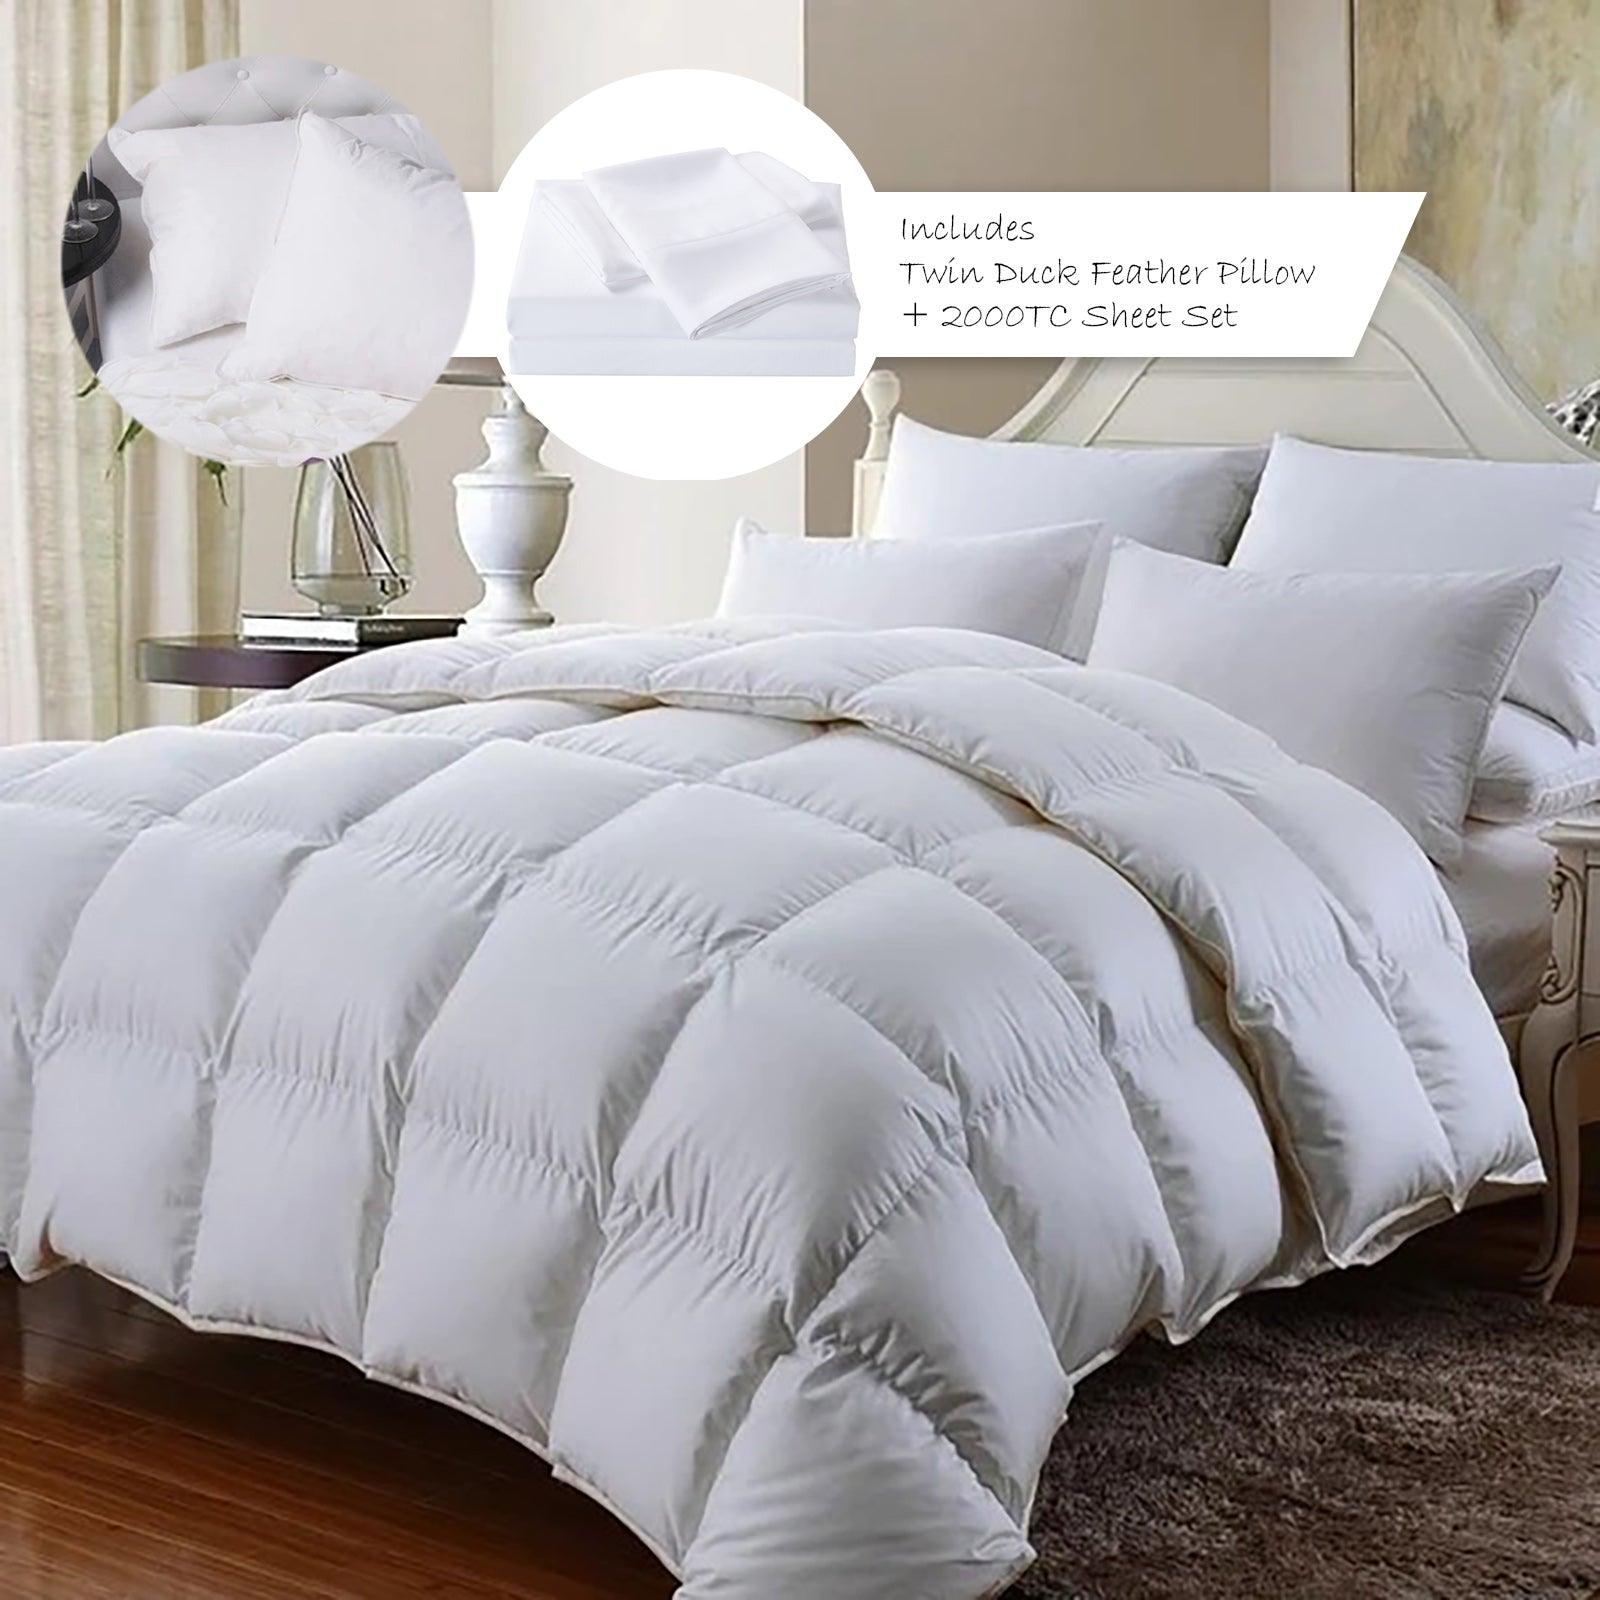 Royal Comfort 350GSM Bamboo Quilt 2000TC Sheet Set And 2 Pack Duck Pillows Set - Single - White